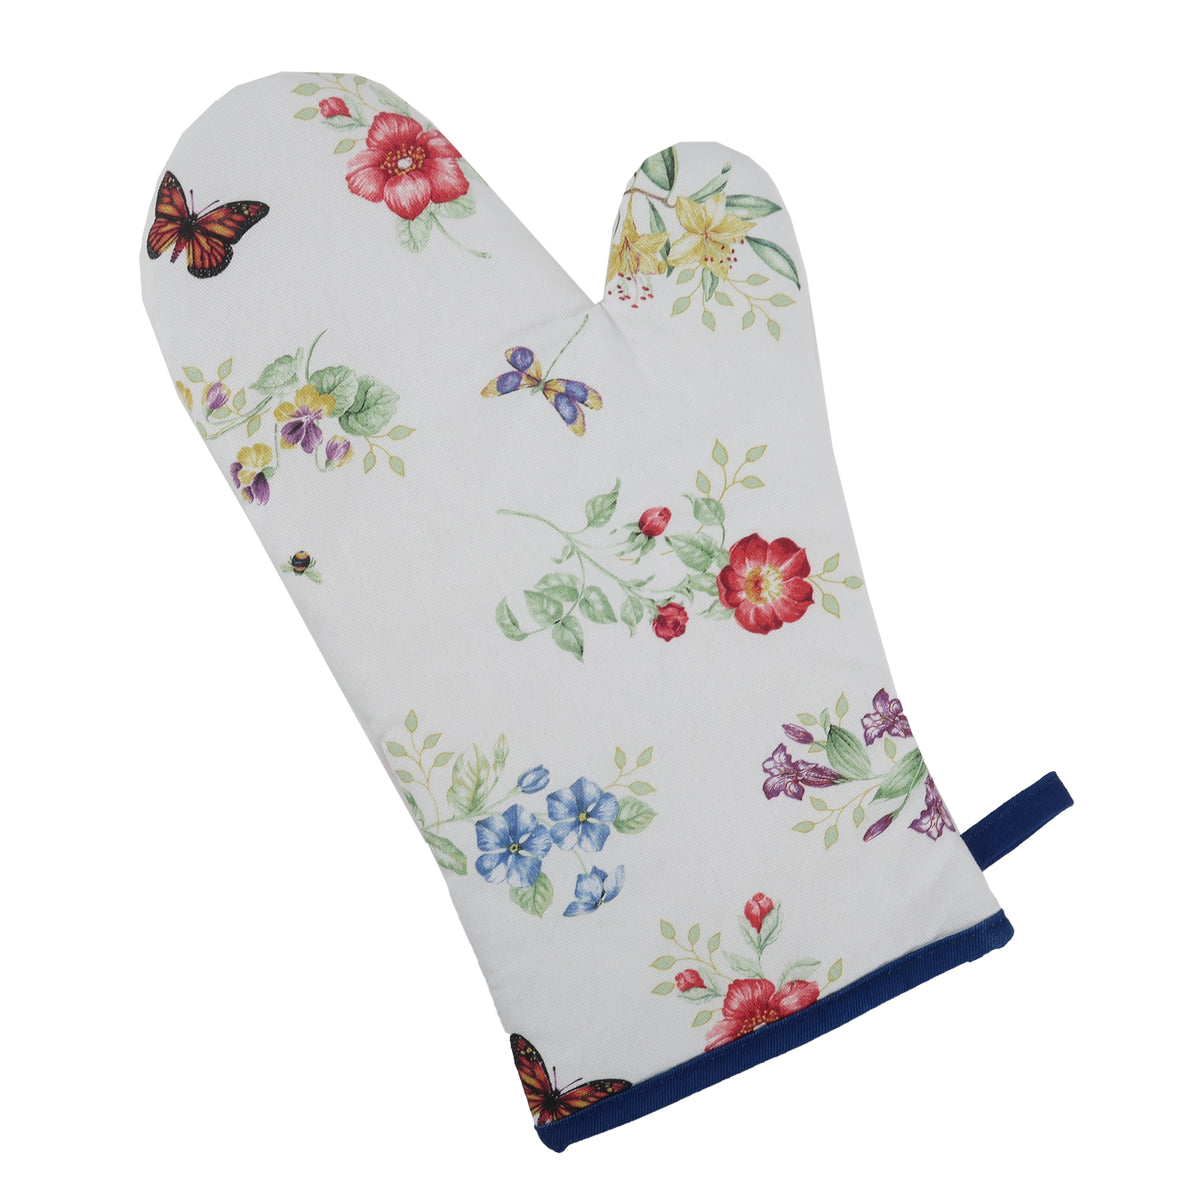 Linen Kitchen Mini Glove With a Flower of the Meadow Print, Mini